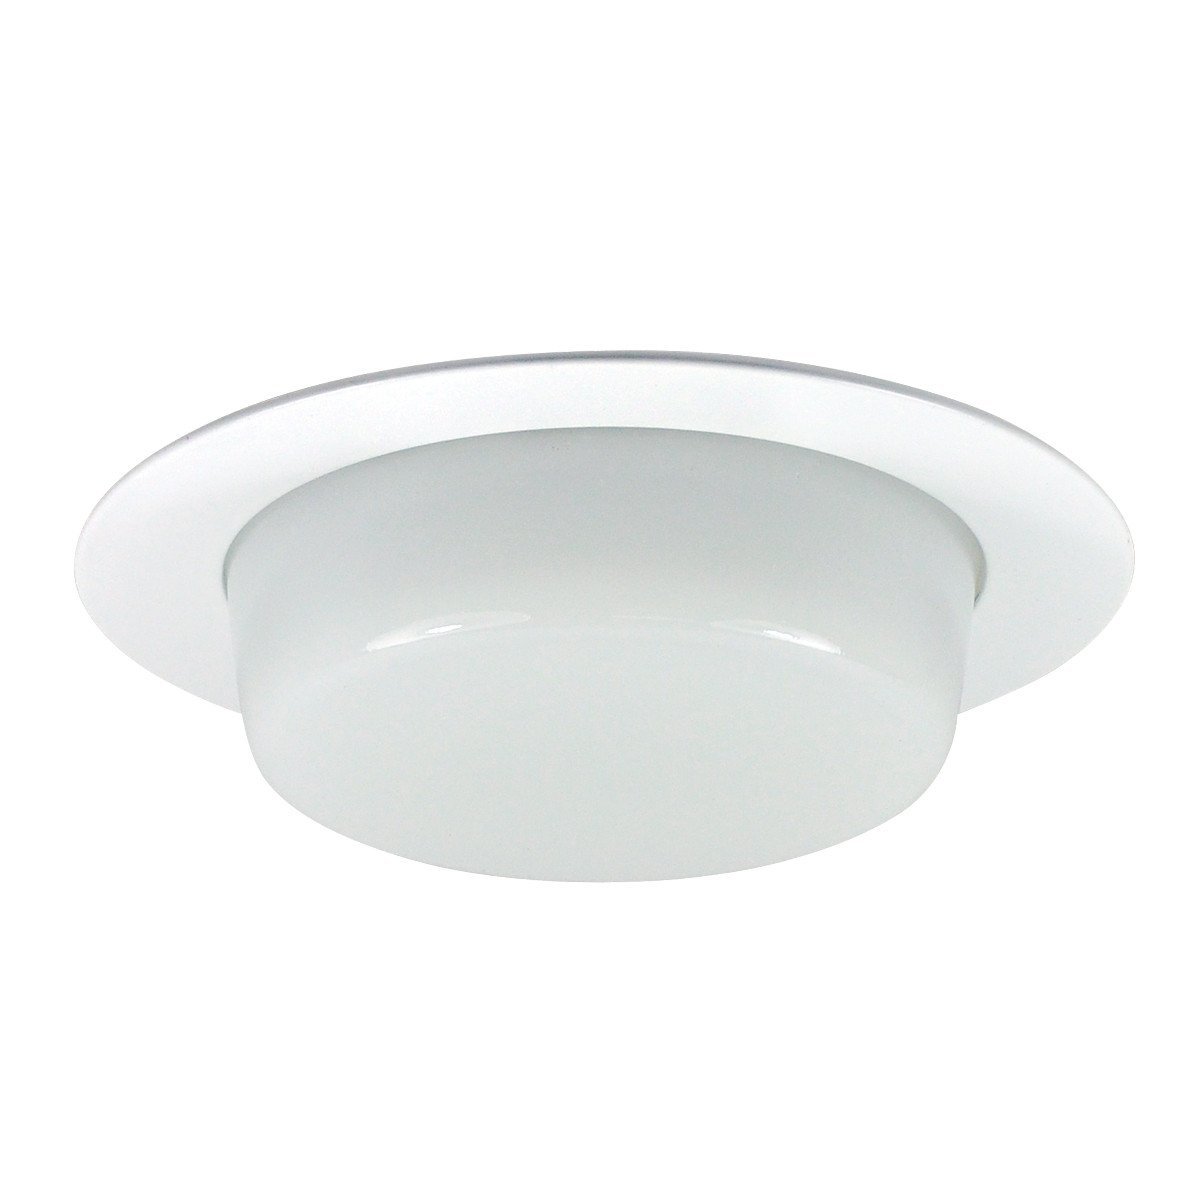 4" Recessed Trim - Drop Opal Lens, Specular Clear Reflector, White Ring Recessed Nora Lighting 